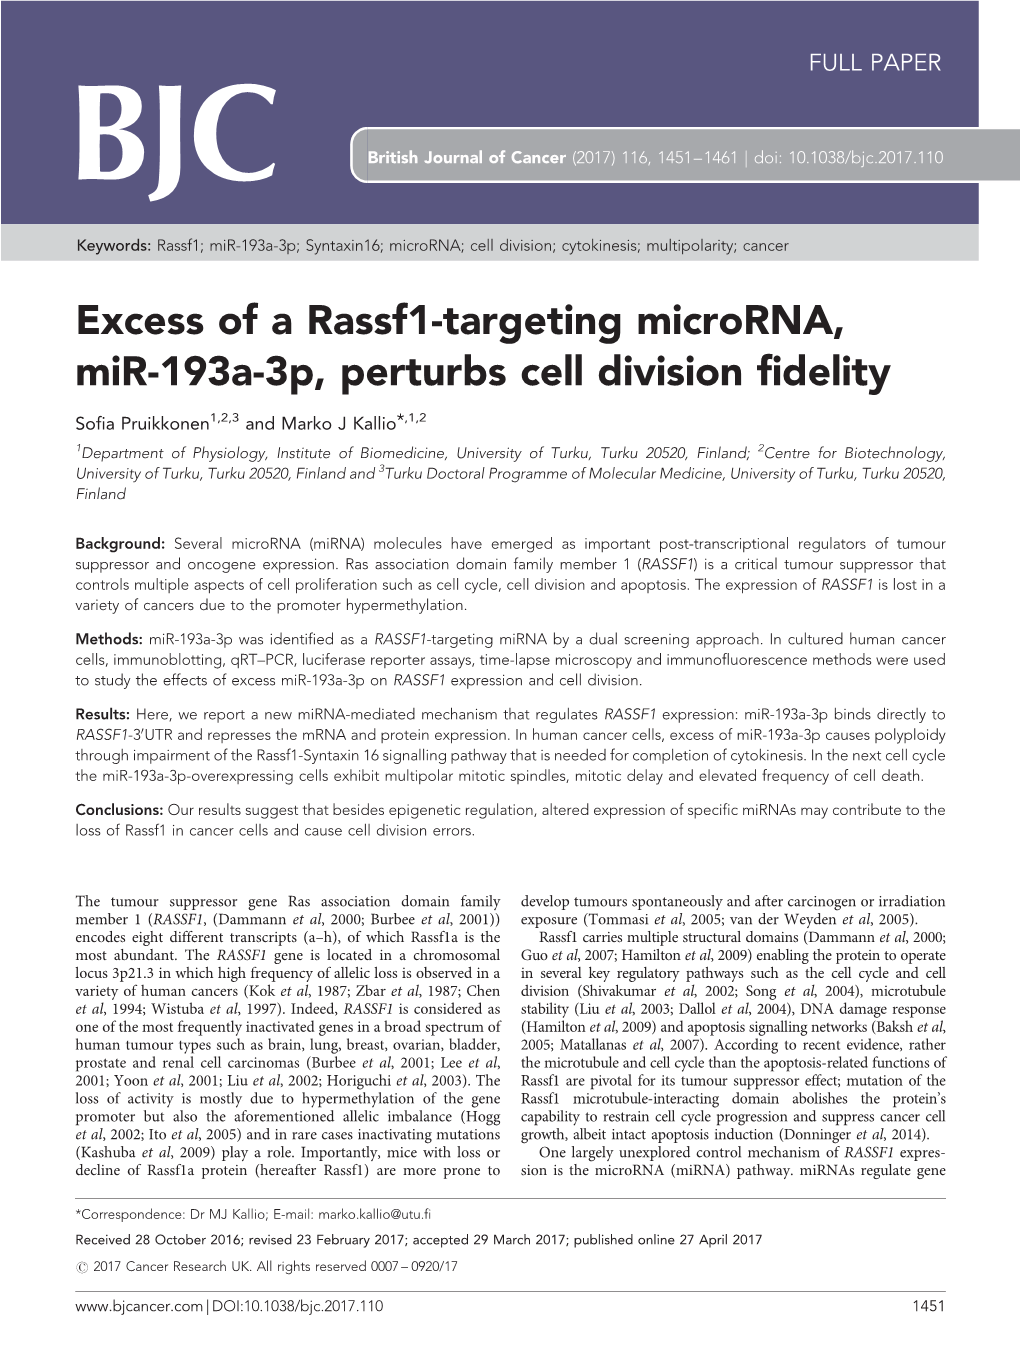 Excess of a Rassf1-Targeting Microrna, Mir-193A-3P, Perturbs Cell Division Fidelity